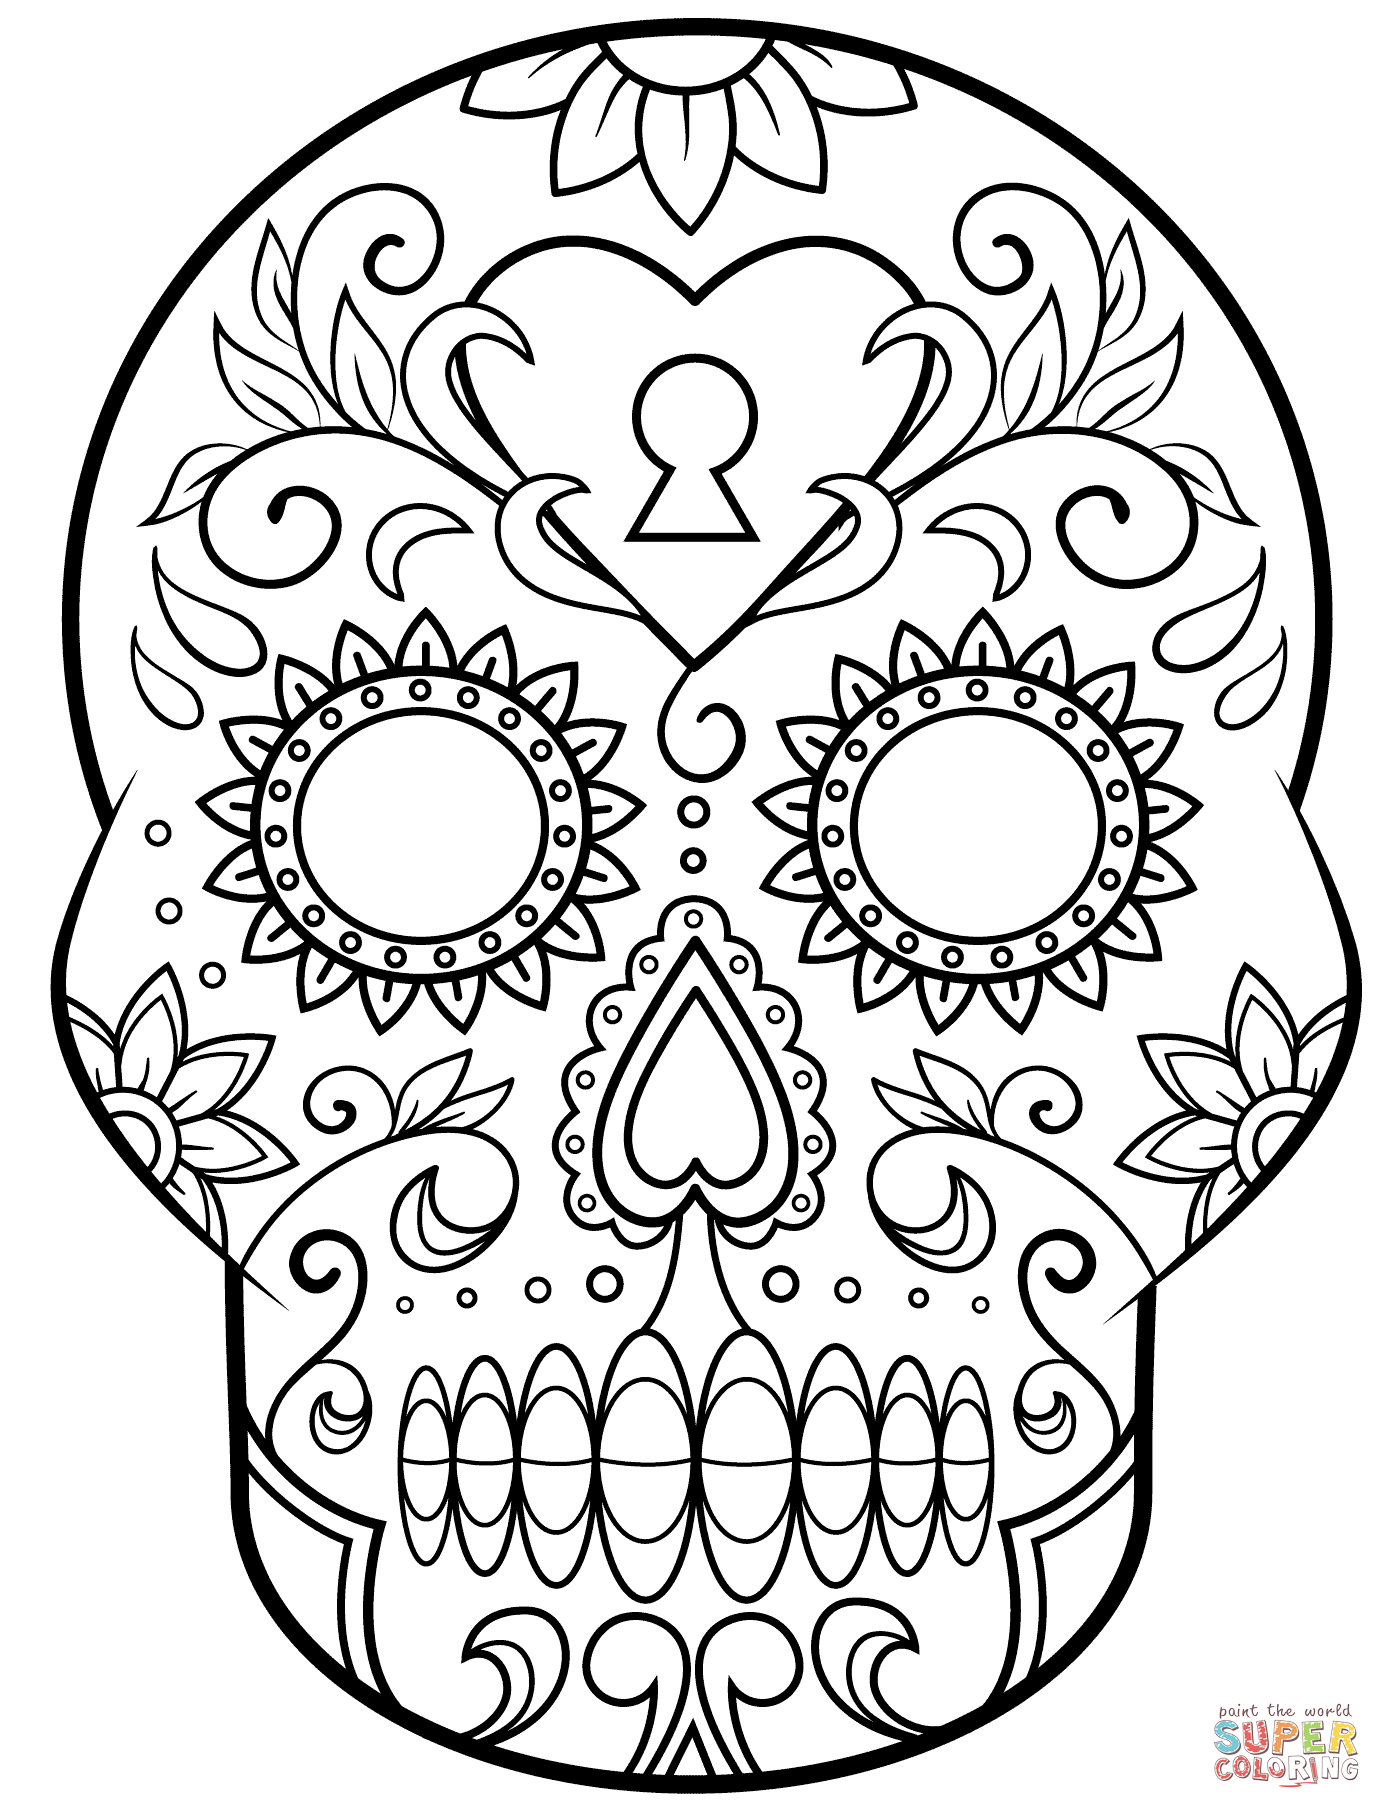 Day Of The Dead Sugar Skull Coloring Page | Free Printable Coloring - Free Printable Sugar Skull Day Of The Dead Mask